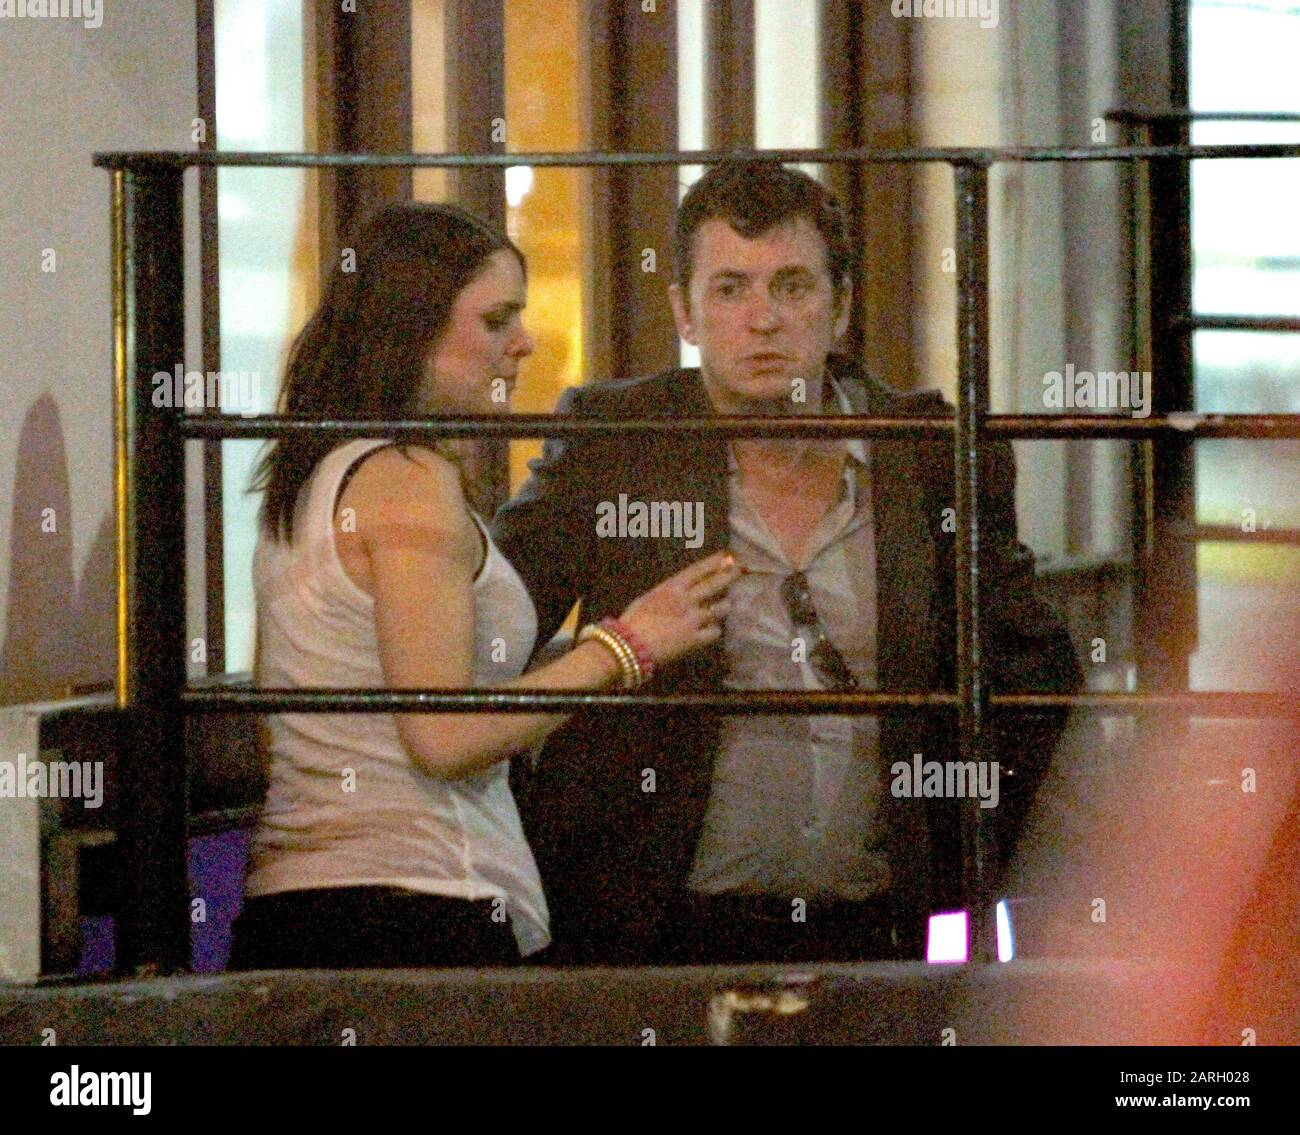 TV presenter Susie Amy and Eastenders actor Shane Richie enjoy a night out in Soho, London England 15.04.10 Stock Photo